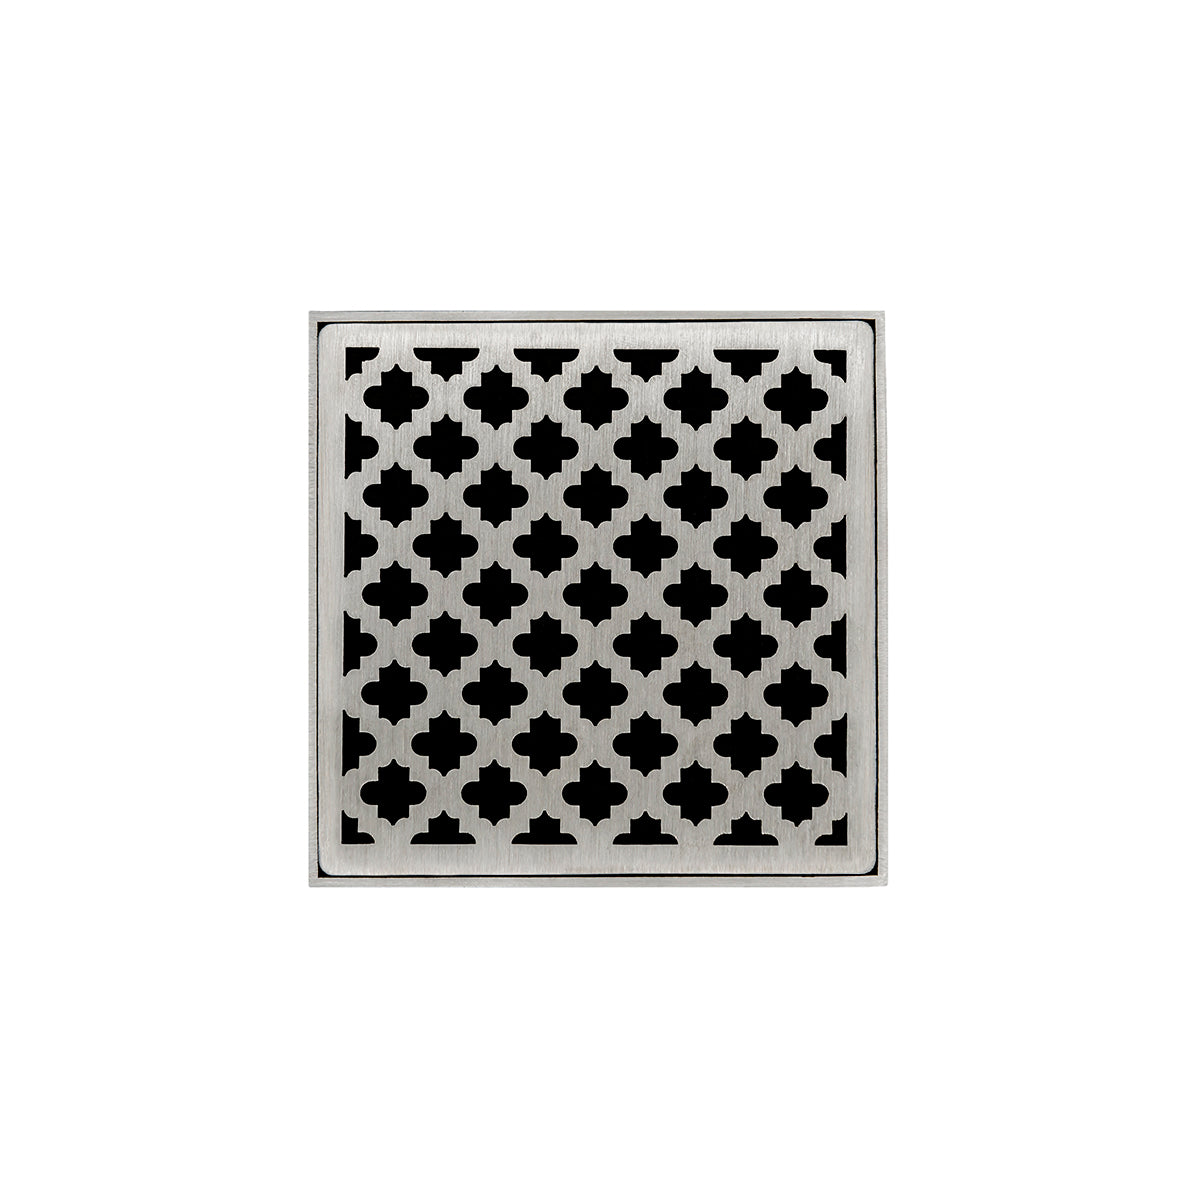 Infinity Drain 5" x 5" MD 5 High Flow Premium Center Drain Kit with Moor Pattern Decorative Plate with PVC Drain Body, 3" Outlet